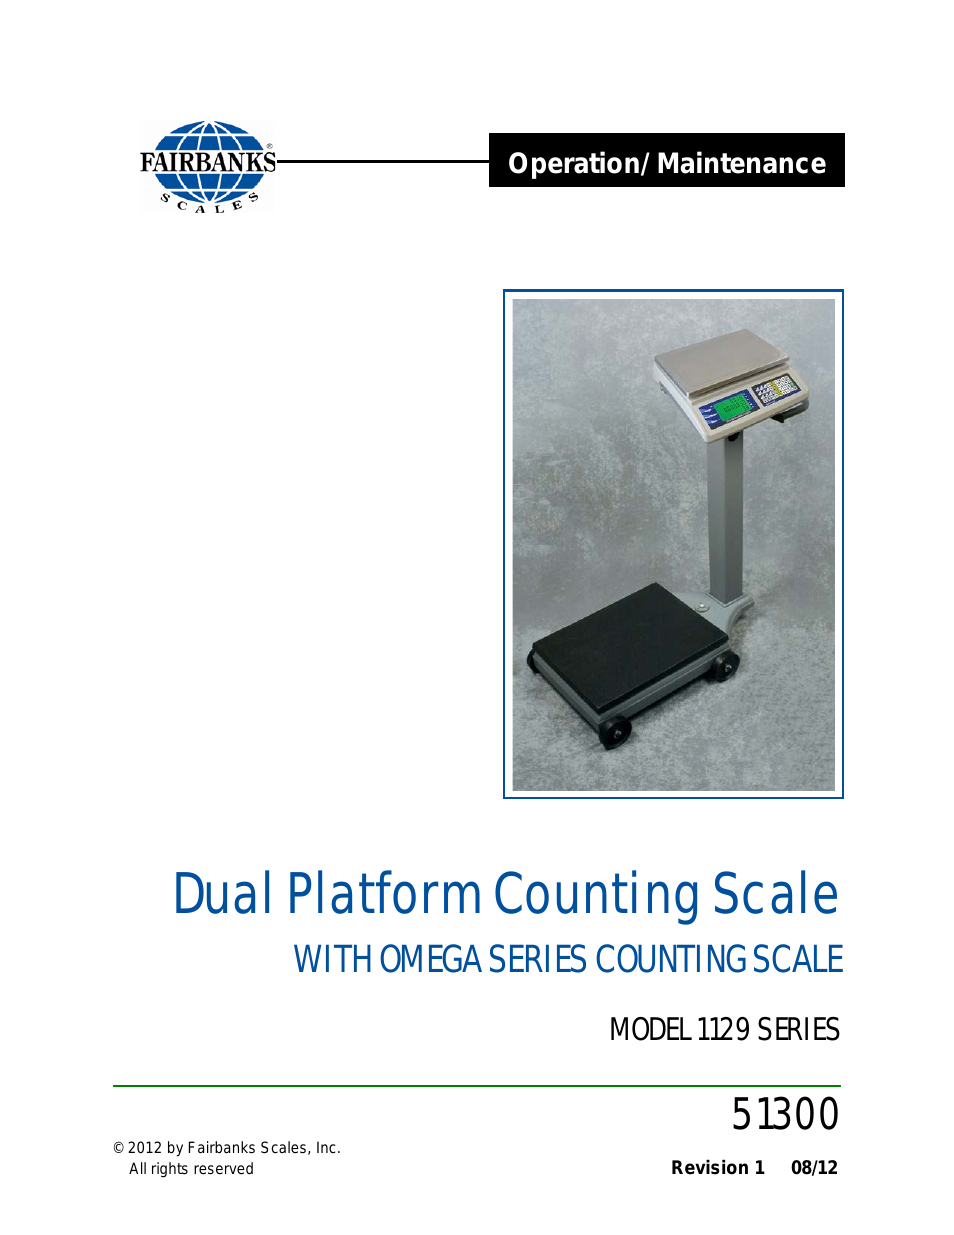 1129 SERIES Dual Platform Counting Scale